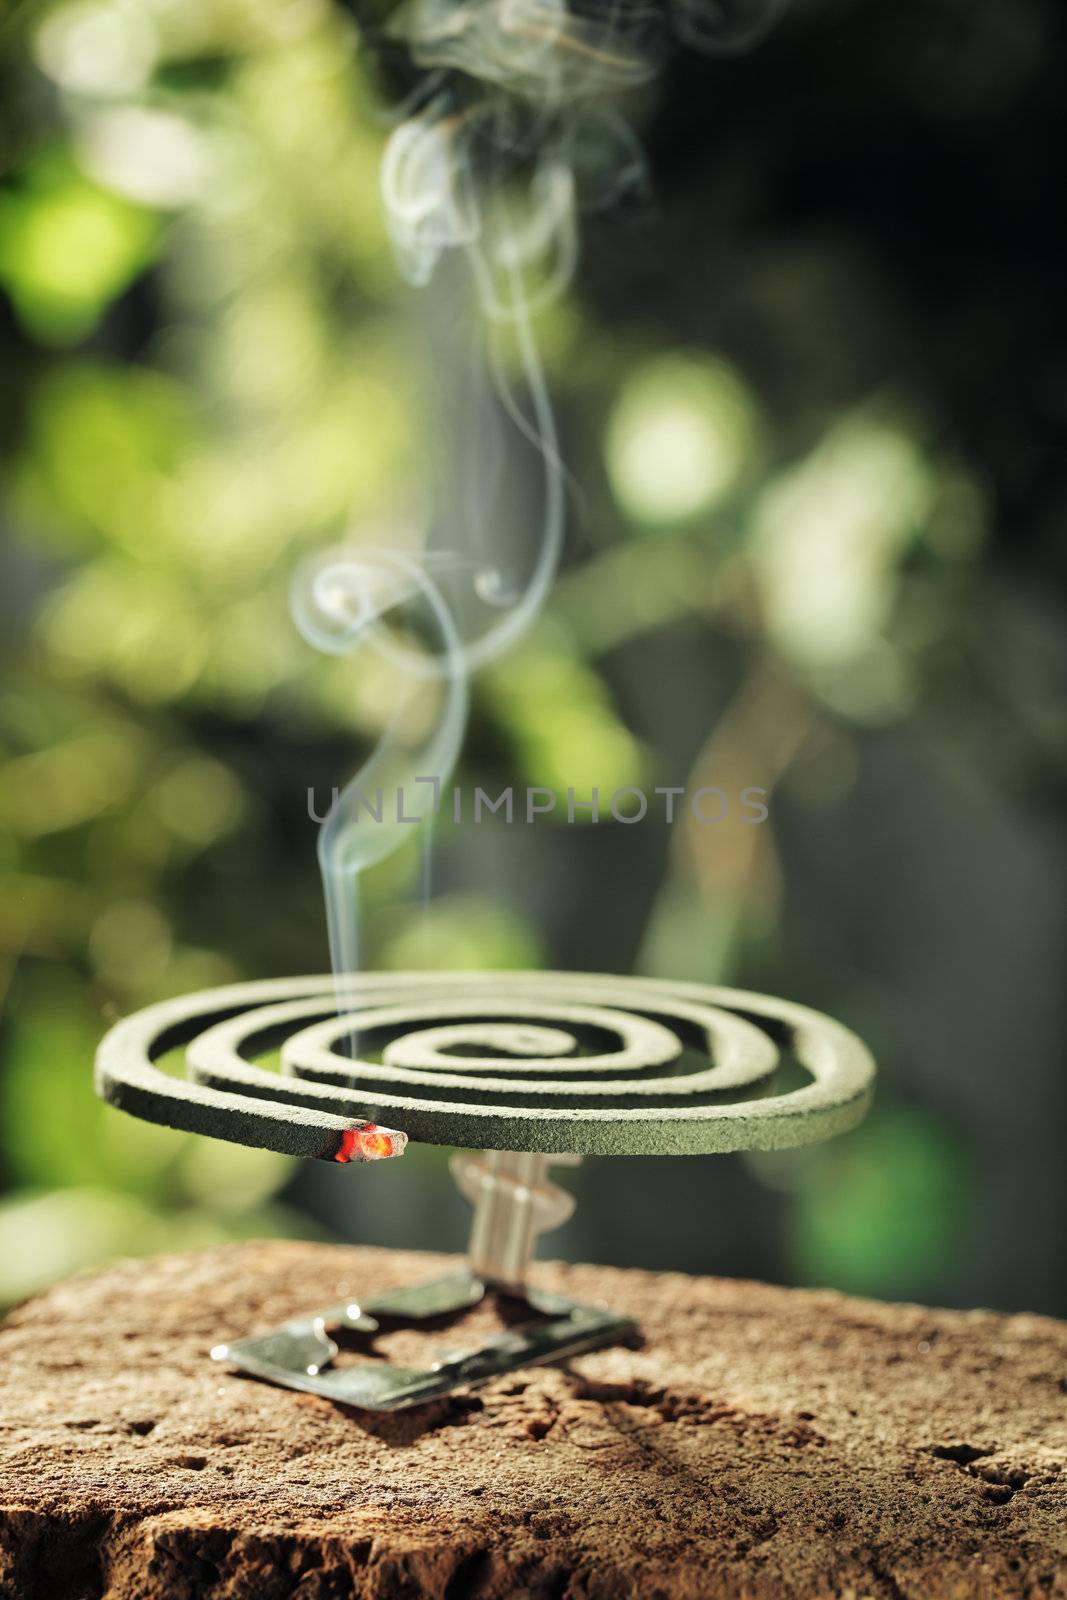 Insect repellent mosquito coil smoking.